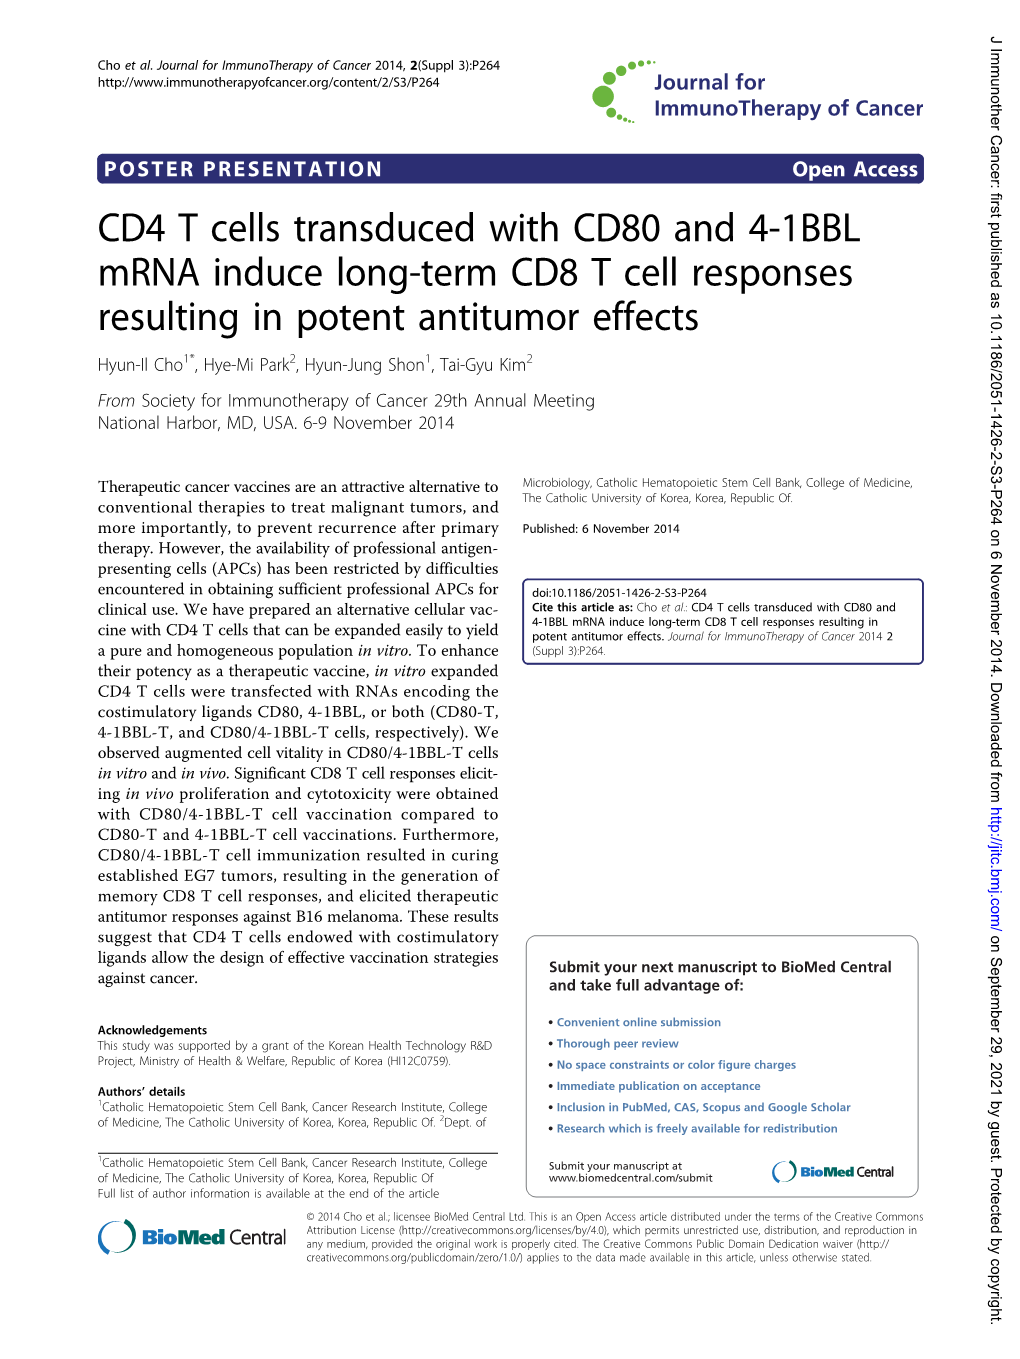 CD4 T Cells Transduced with CD80 and 4-1BBL Mrna Induce Long